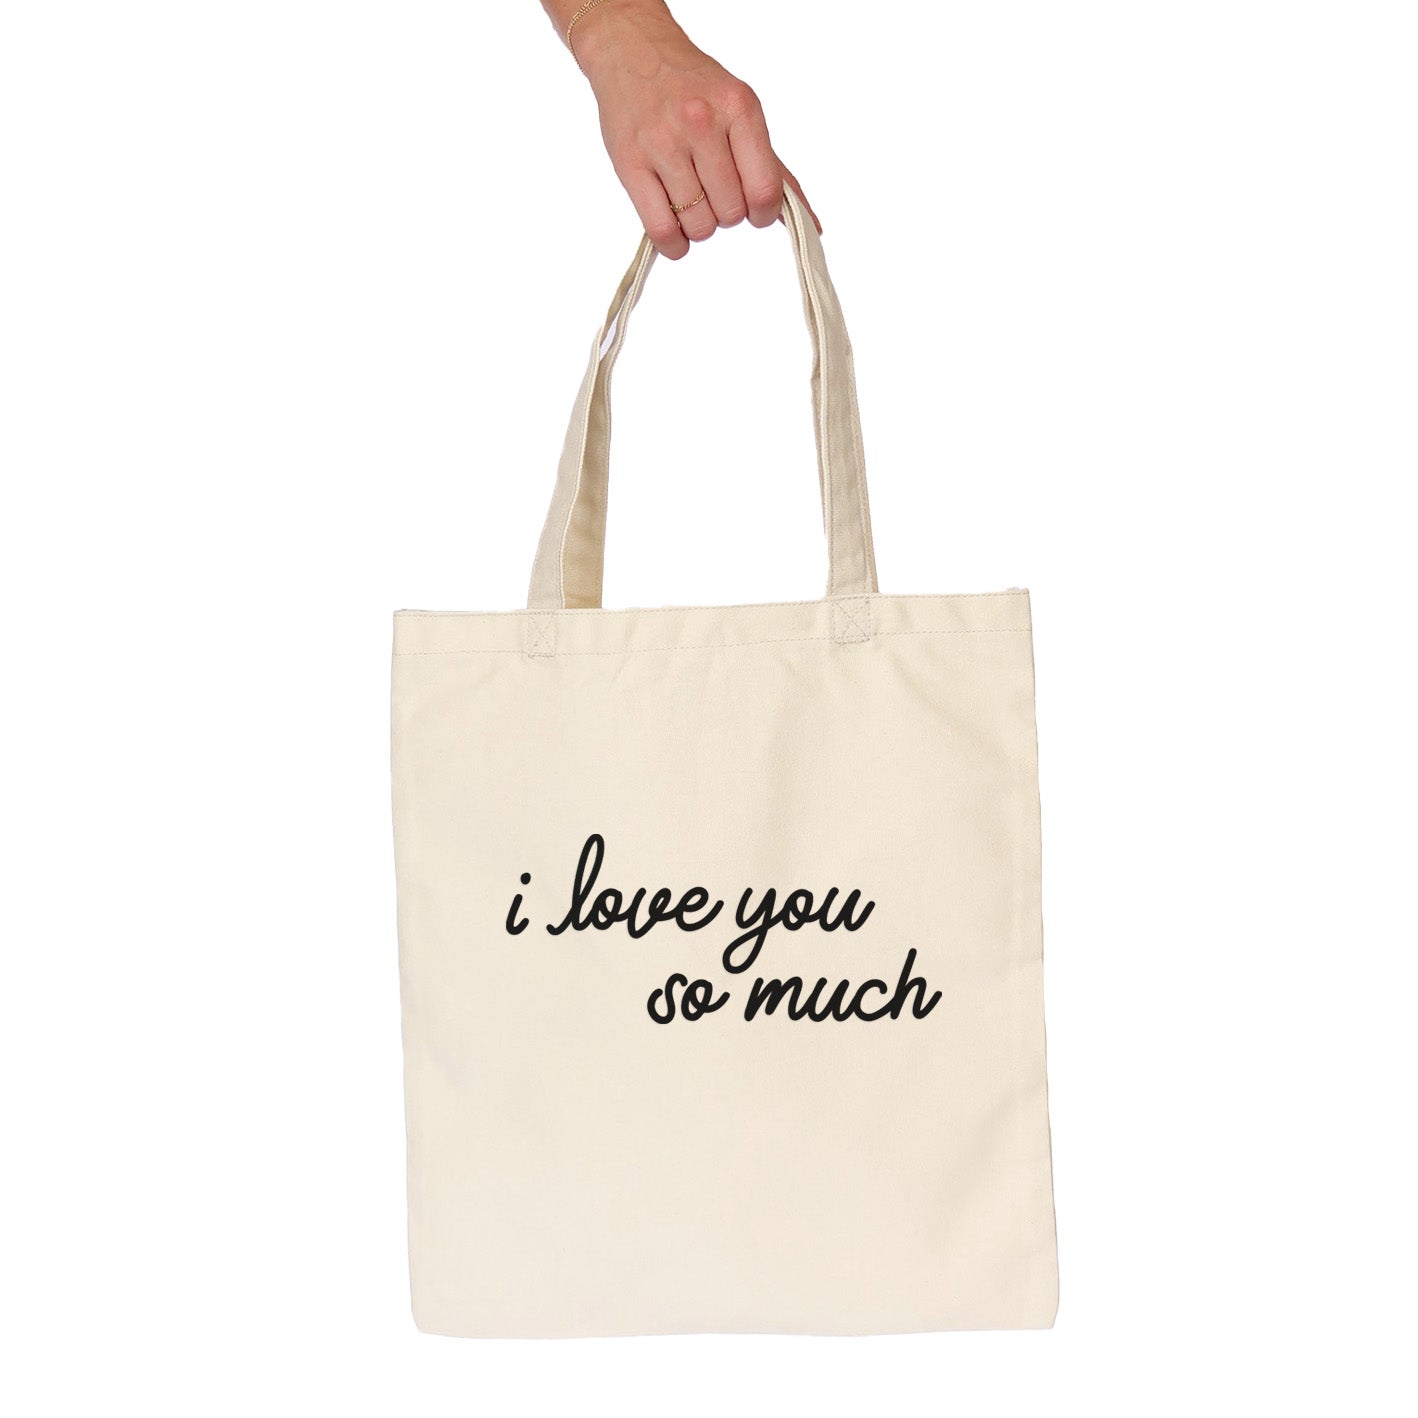 I Love You So Much Tote Bag